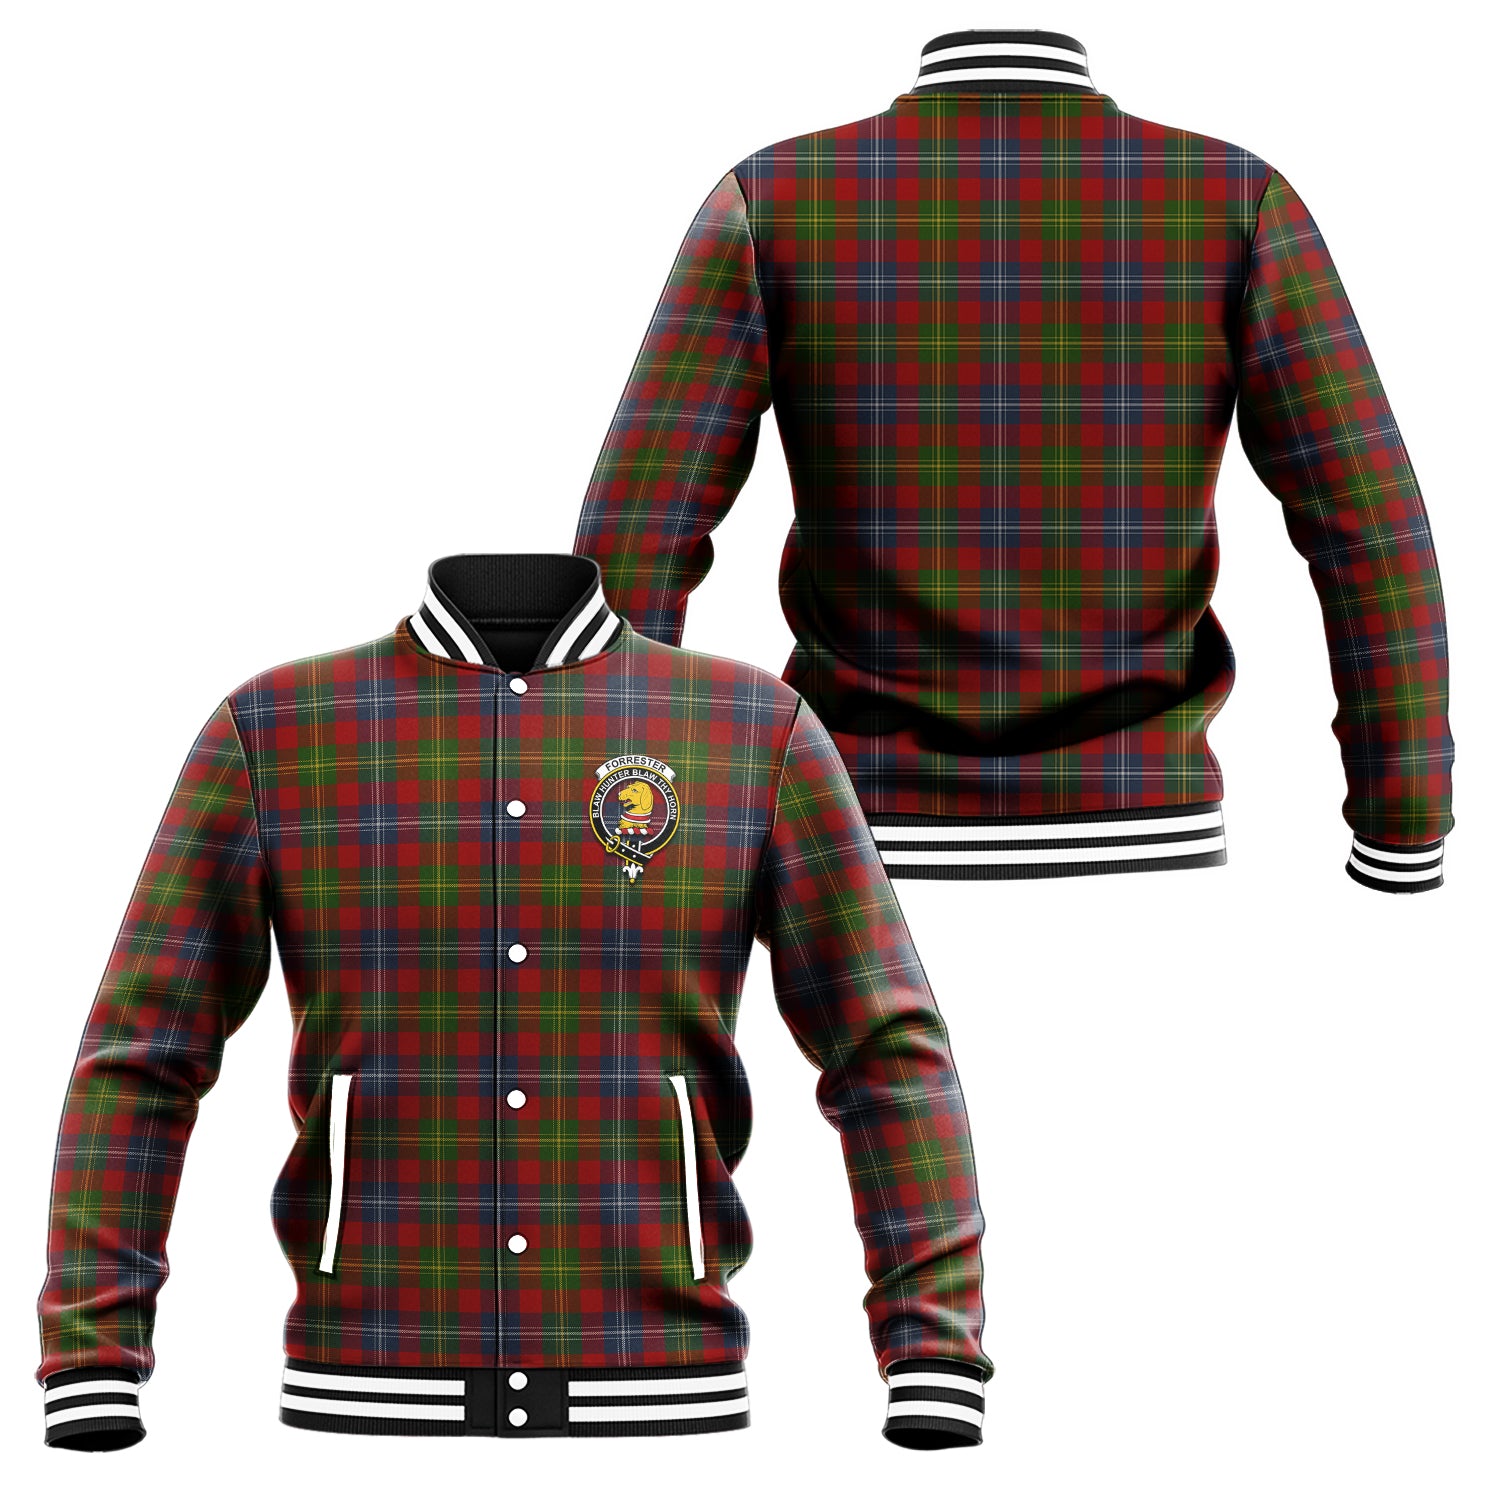 forrester-or-foster-tartan-baseball-jacket-with-family-crest